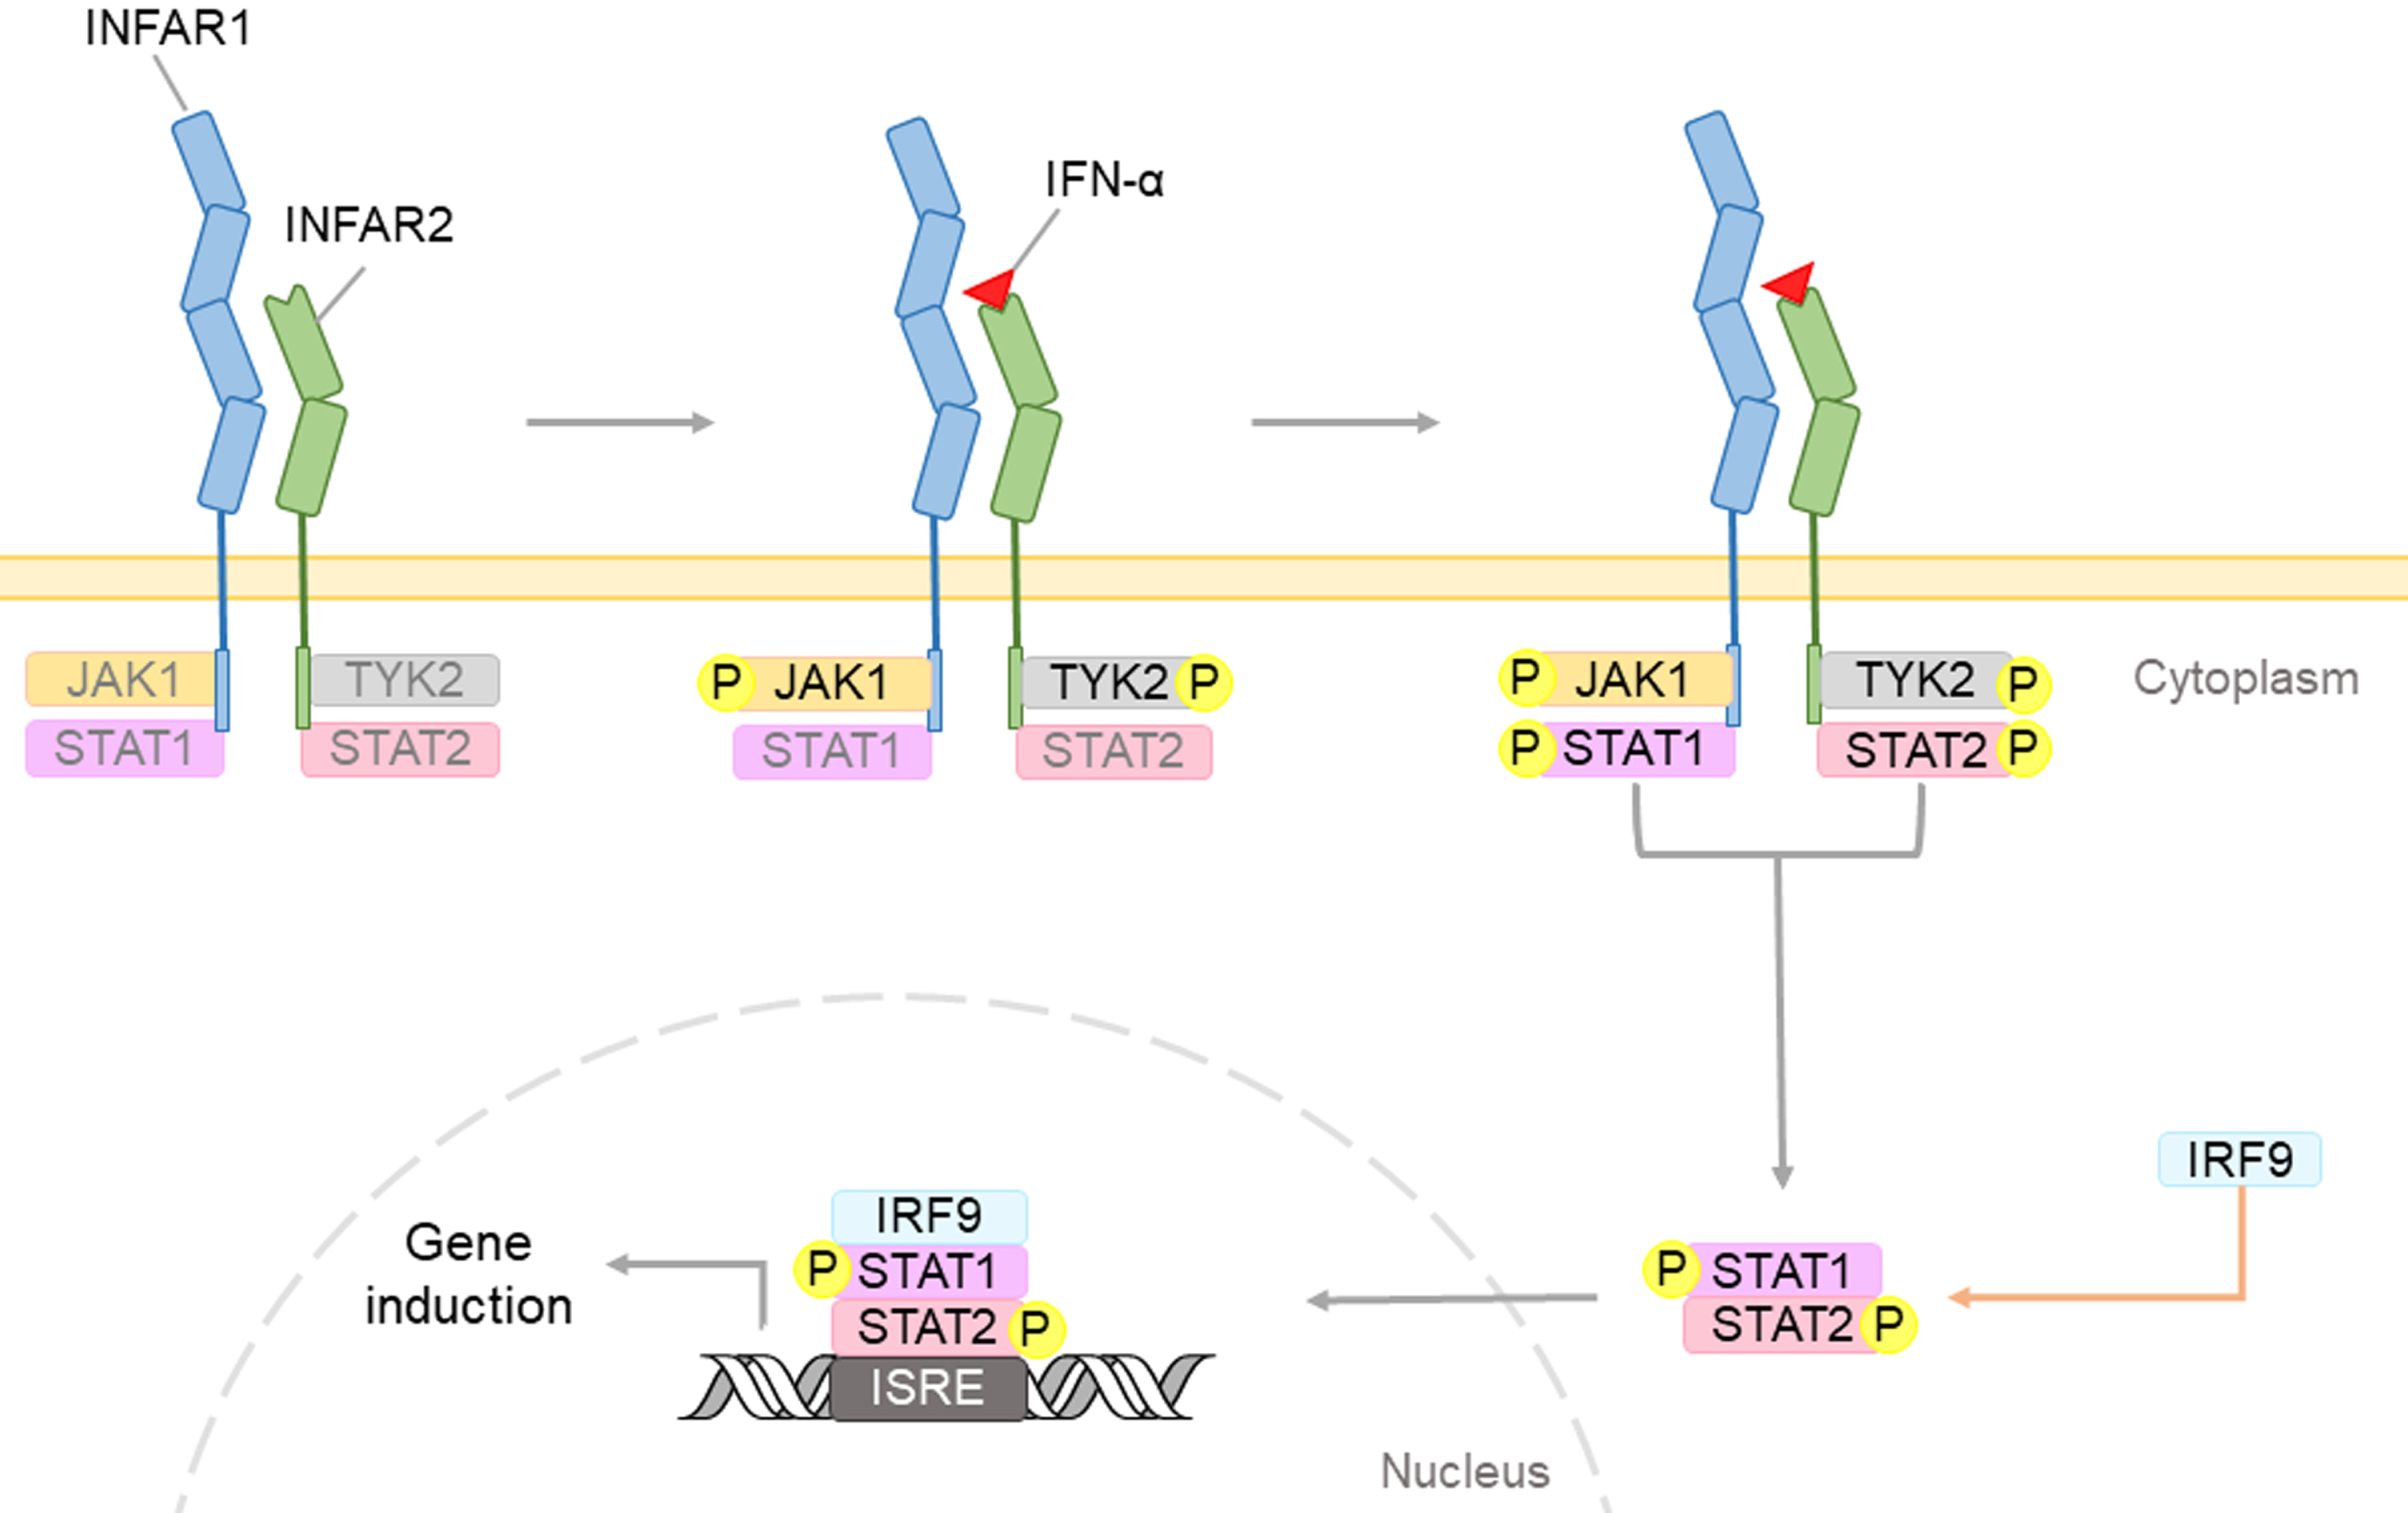 Type I IFNs, such as IFN-α, may bind to cell surface receptor containing two subunits: IFNAR1 and IFNAR2. This complex triggers the phosphorylation of the JAK-STAT proteins. The IFN regulatory factor 9 (IRF9), will form complexes with STAT dimers, and will translocate into the nucleus. Upon binding to interferon-sensitive response element (ISRE), IFN-induced genes would be expressed to induce IFN-mediated biological effects.